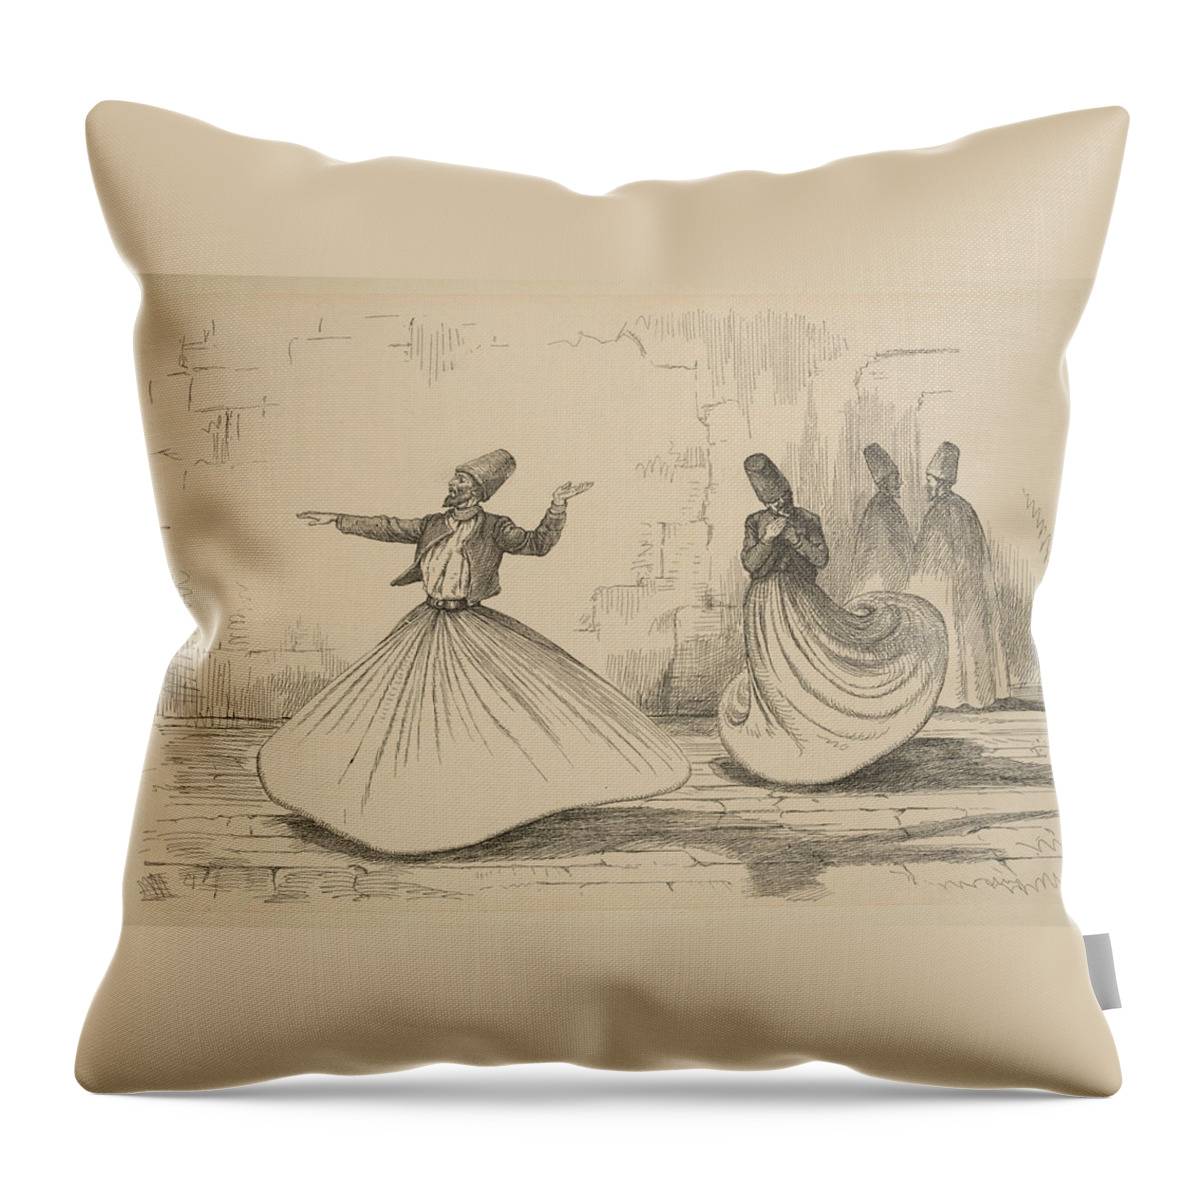 On The Nile - Shebook In The Cabin- Whirling Dervish 1874 Throw Pillow featuring the painting On the Nile - Shebook in the Cabin - whirling dervish by Celestial Images